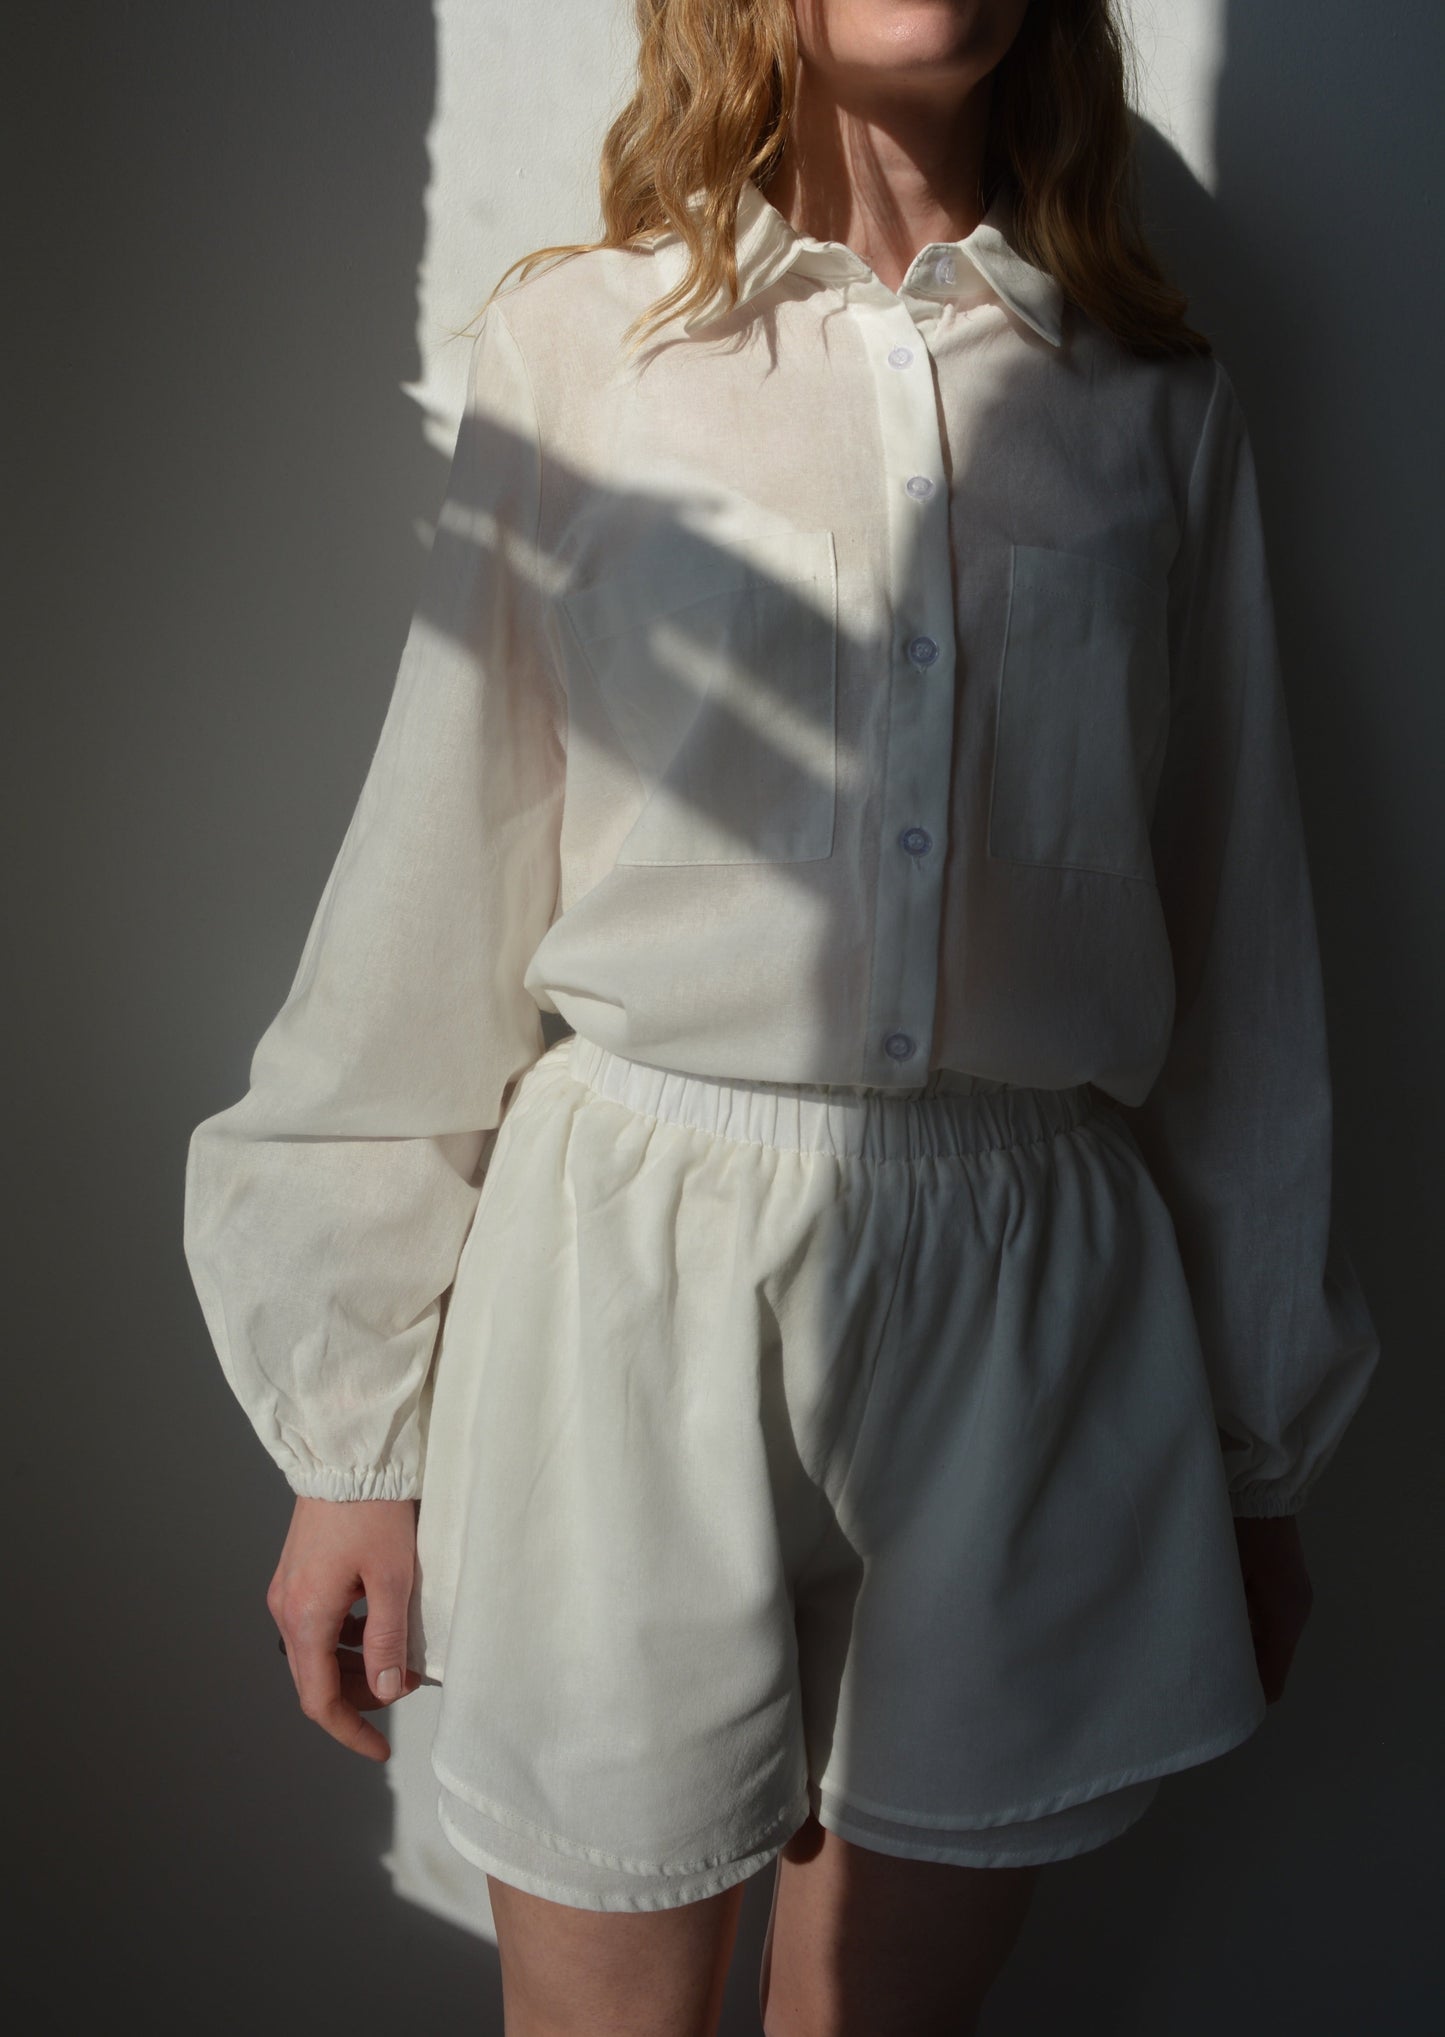 Two Piece Set - Cotton Blouse and Shorts in White color